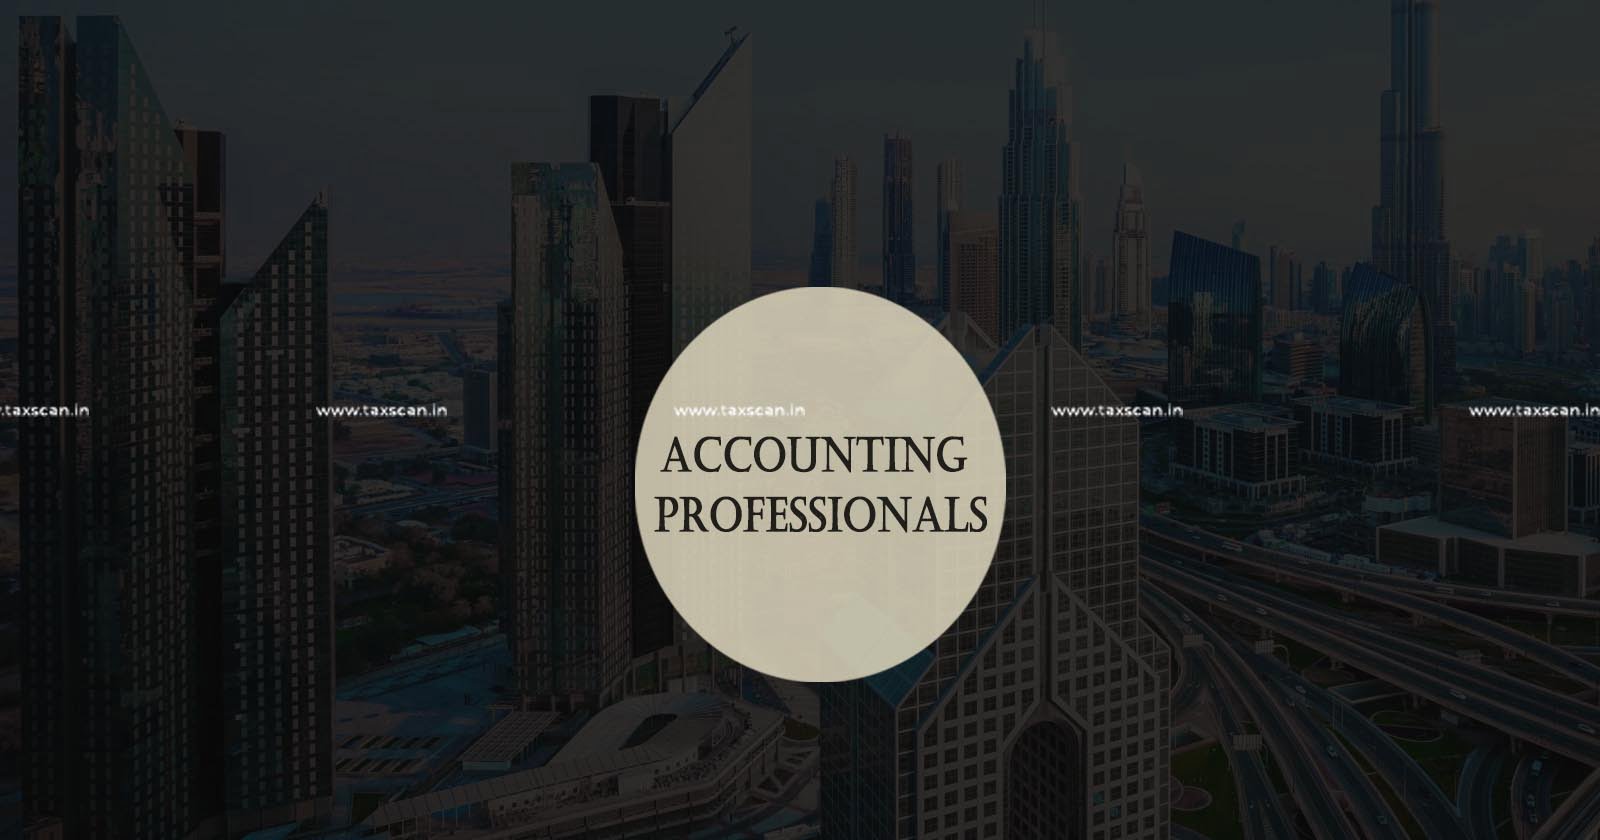 Ethics Code for UAE-based Accounting Professionals - Ethics Code -UAE-based Accounting Professionals - taxscan